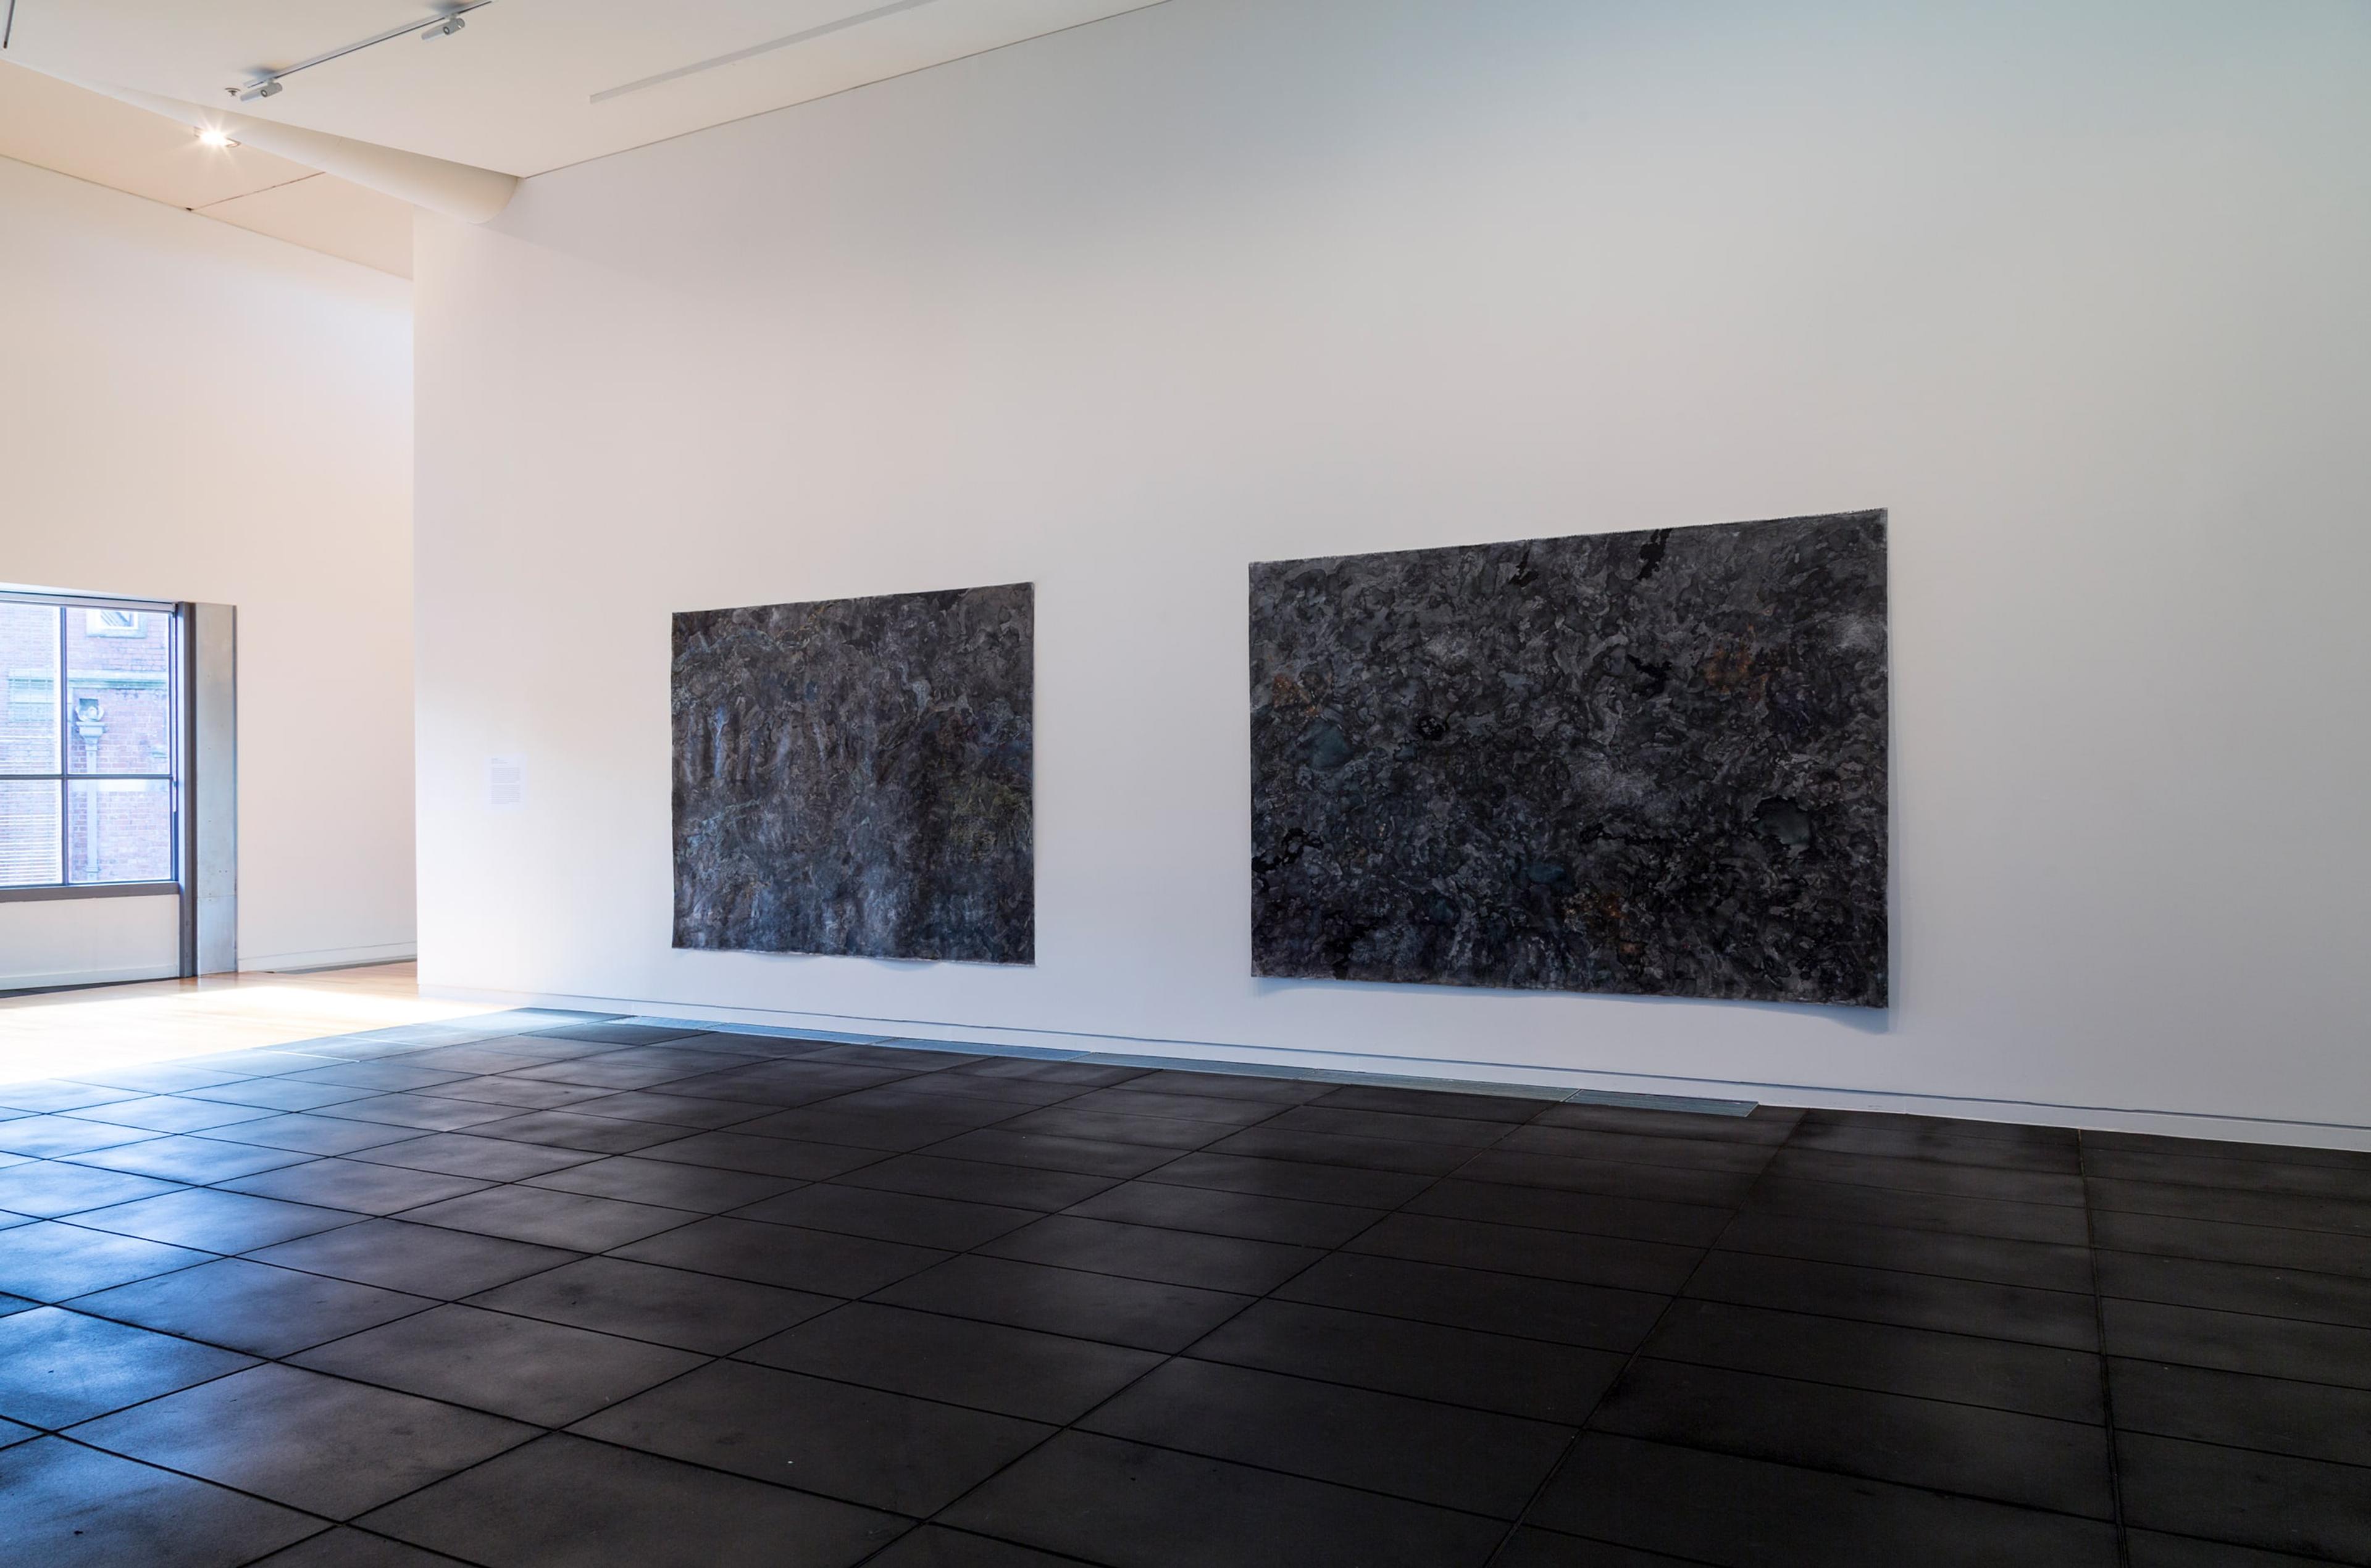 Sarah Treadwell, Oceanic Section 1 & 2, 2014-5, mixed media on unstretched canvas, in the exhibition Drawing Is/Not Building at the Adam Art Gallery Te Pātaka Toi, Victoria University of Wellington (photo: Shaun Waugh)